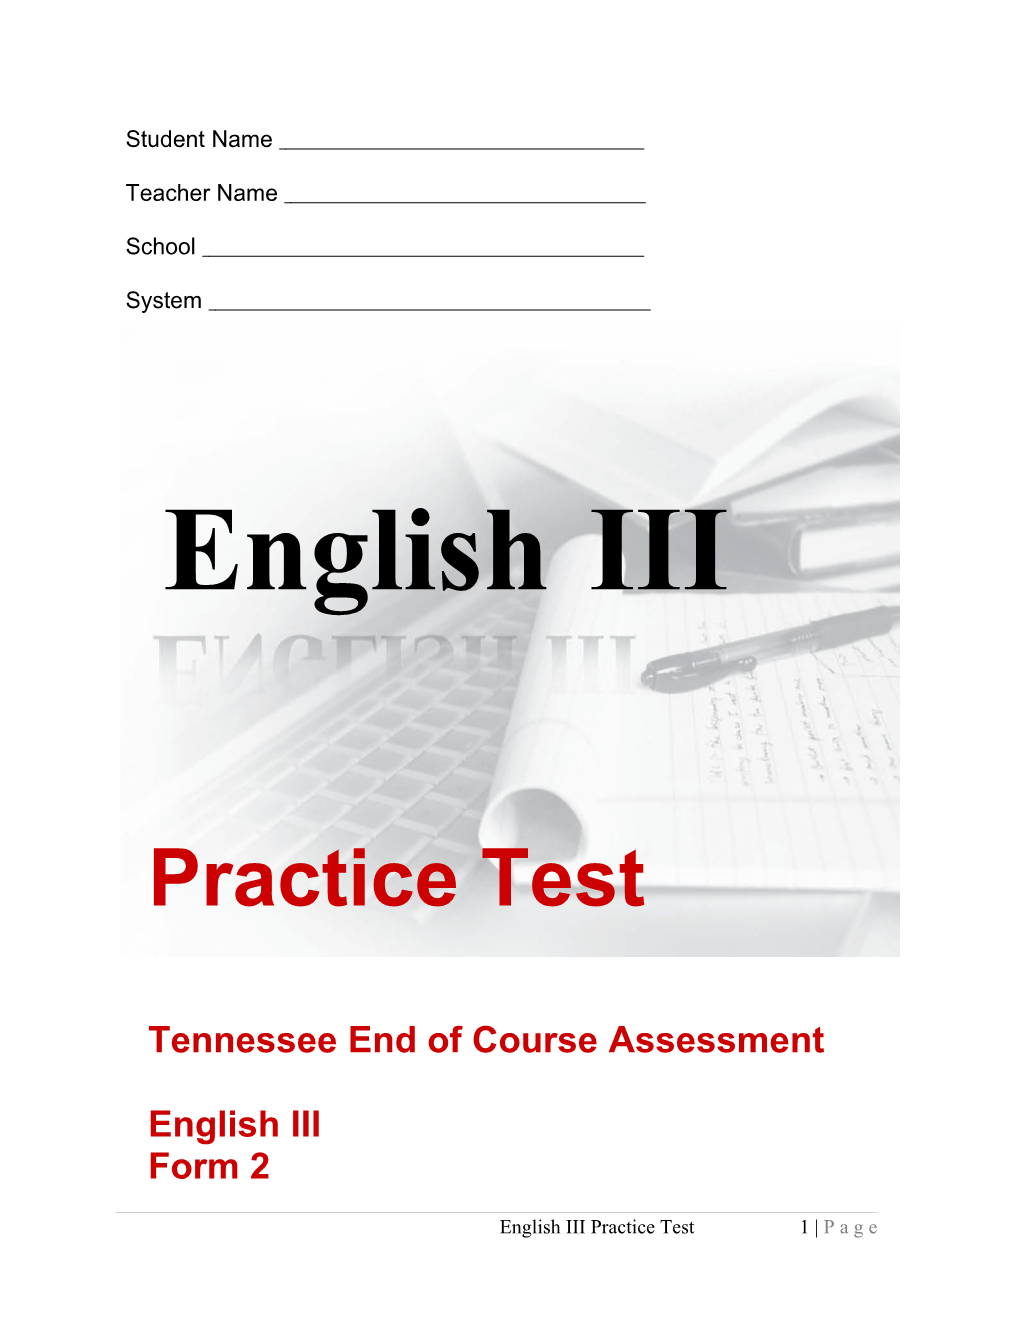 Tennessee End of Courseassessment